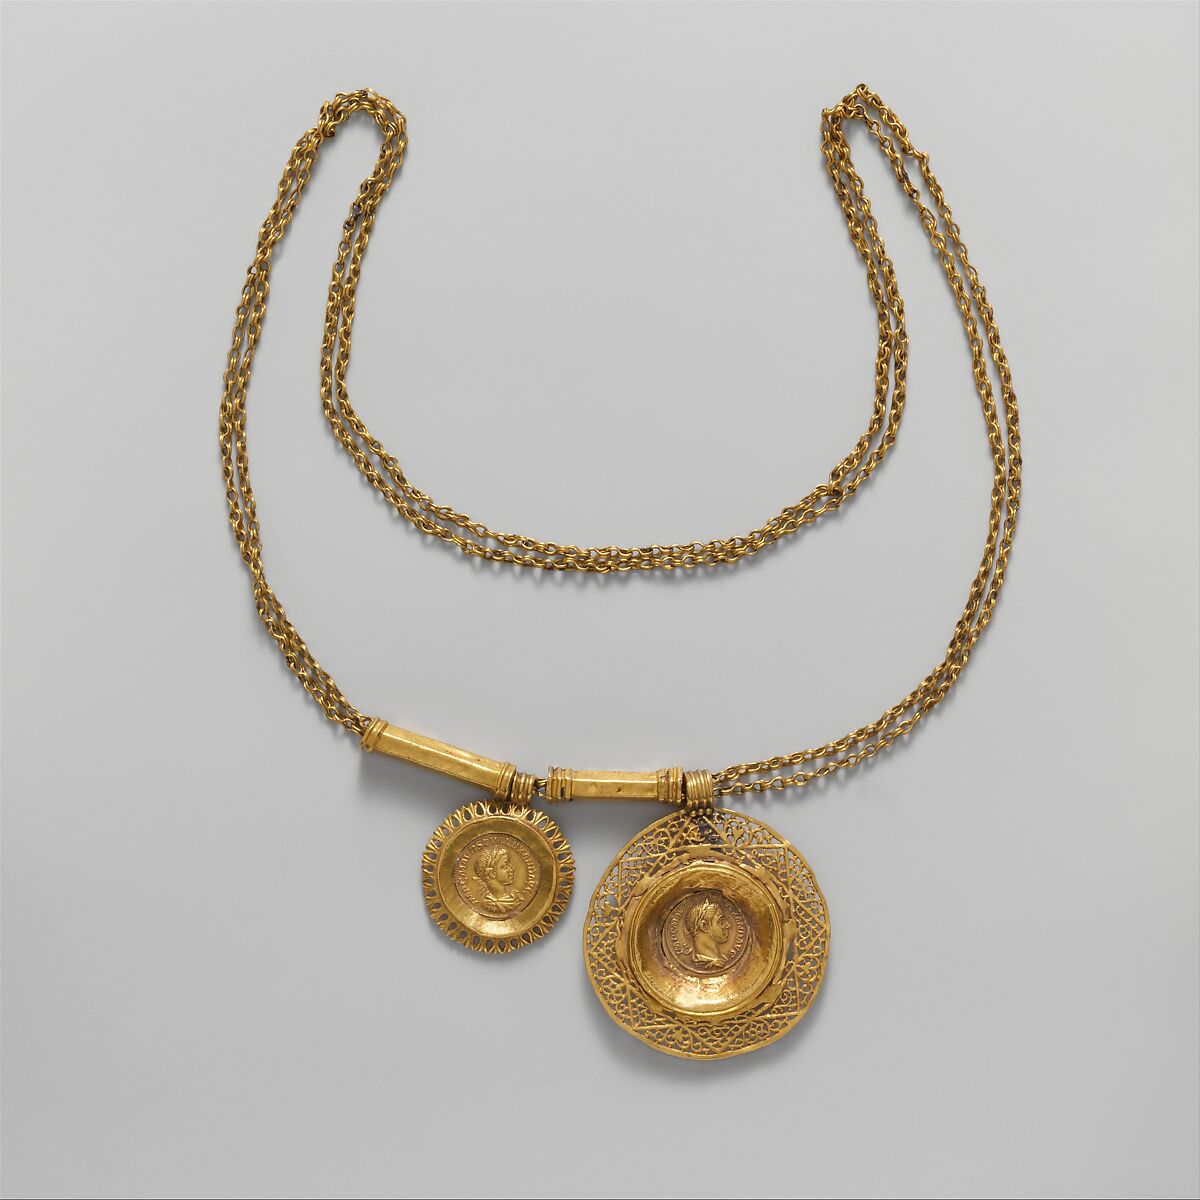 Gold necklace with coin pendants, Gold, Roman 